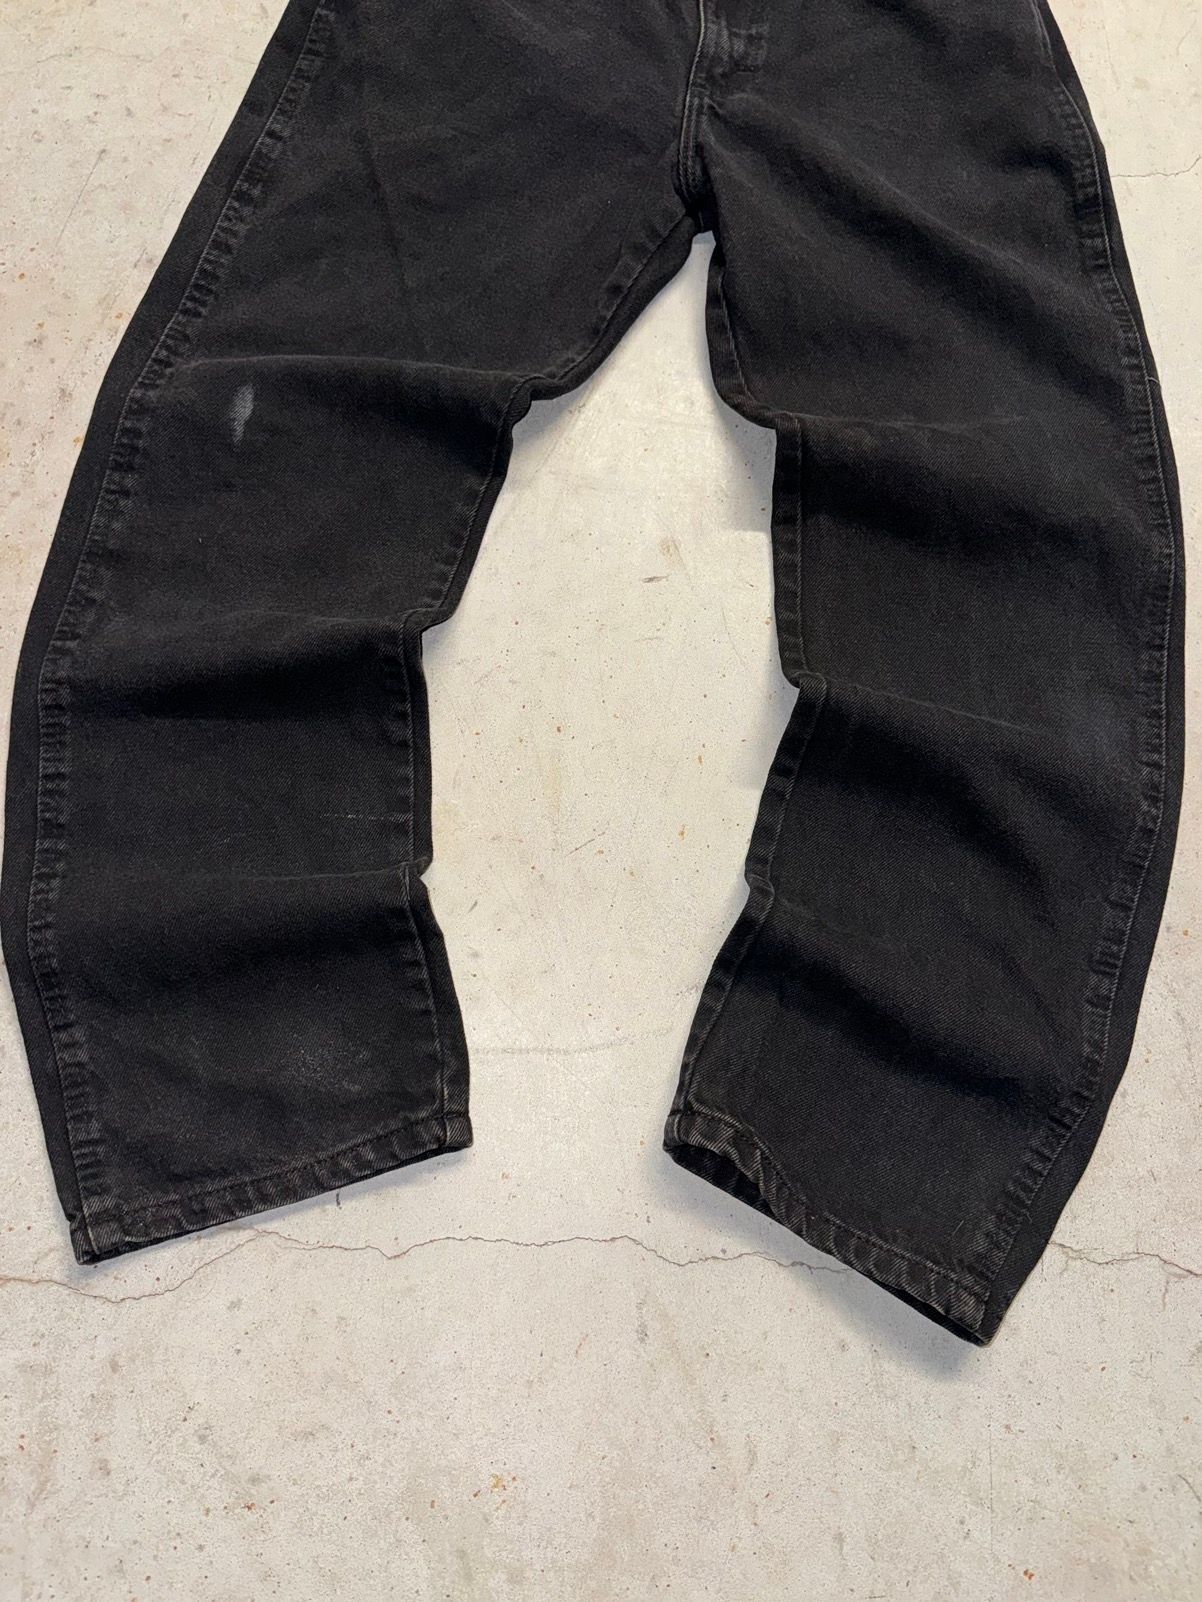 Vintage Crazy Vintage 90s Carhartt Style Faded Black Baggy Jeans Size US 31 - 2 Preview